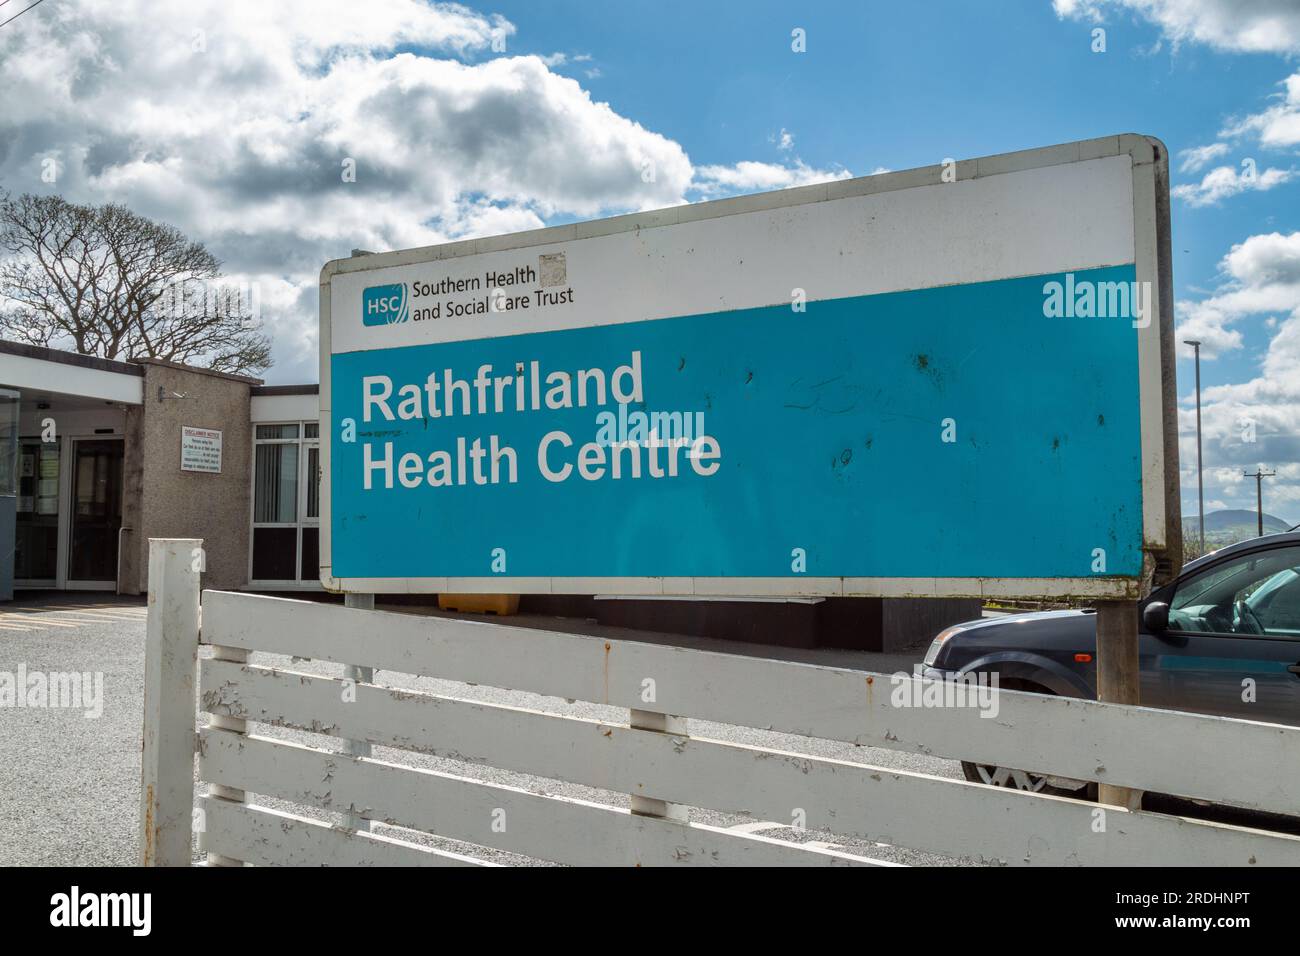 The sign at the Rathfriland Health Centre, run by NHS HSC Southern Health and Social Care Trust. Co. Down, Northern Ireland Stock Photo